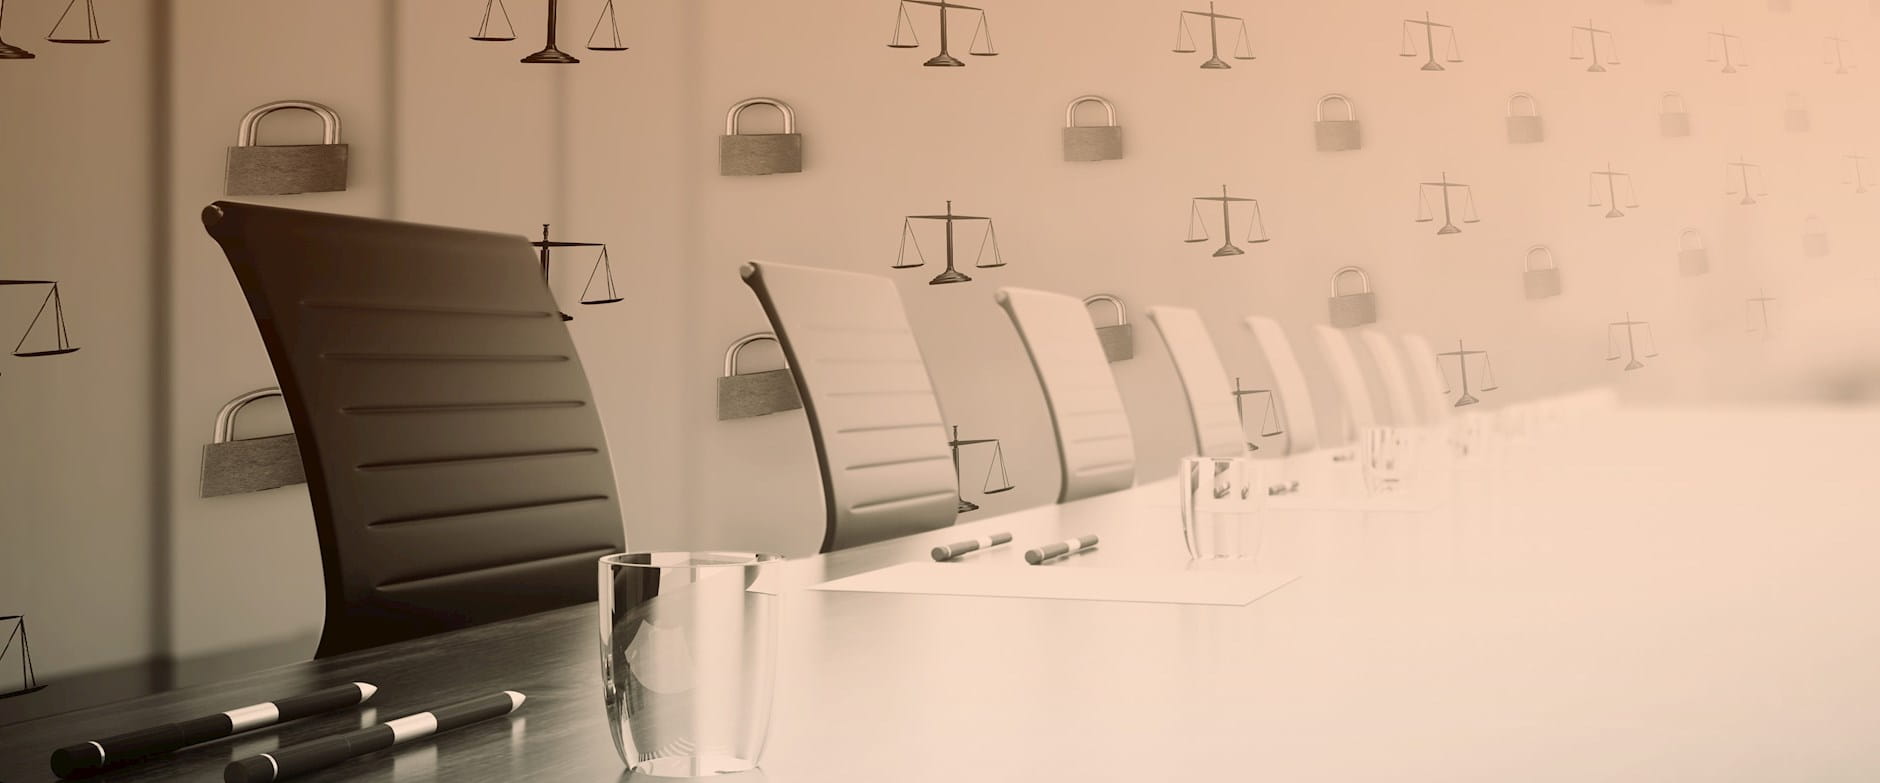 A boardroom with chairs and a pattern of locks and scales of justice behind them